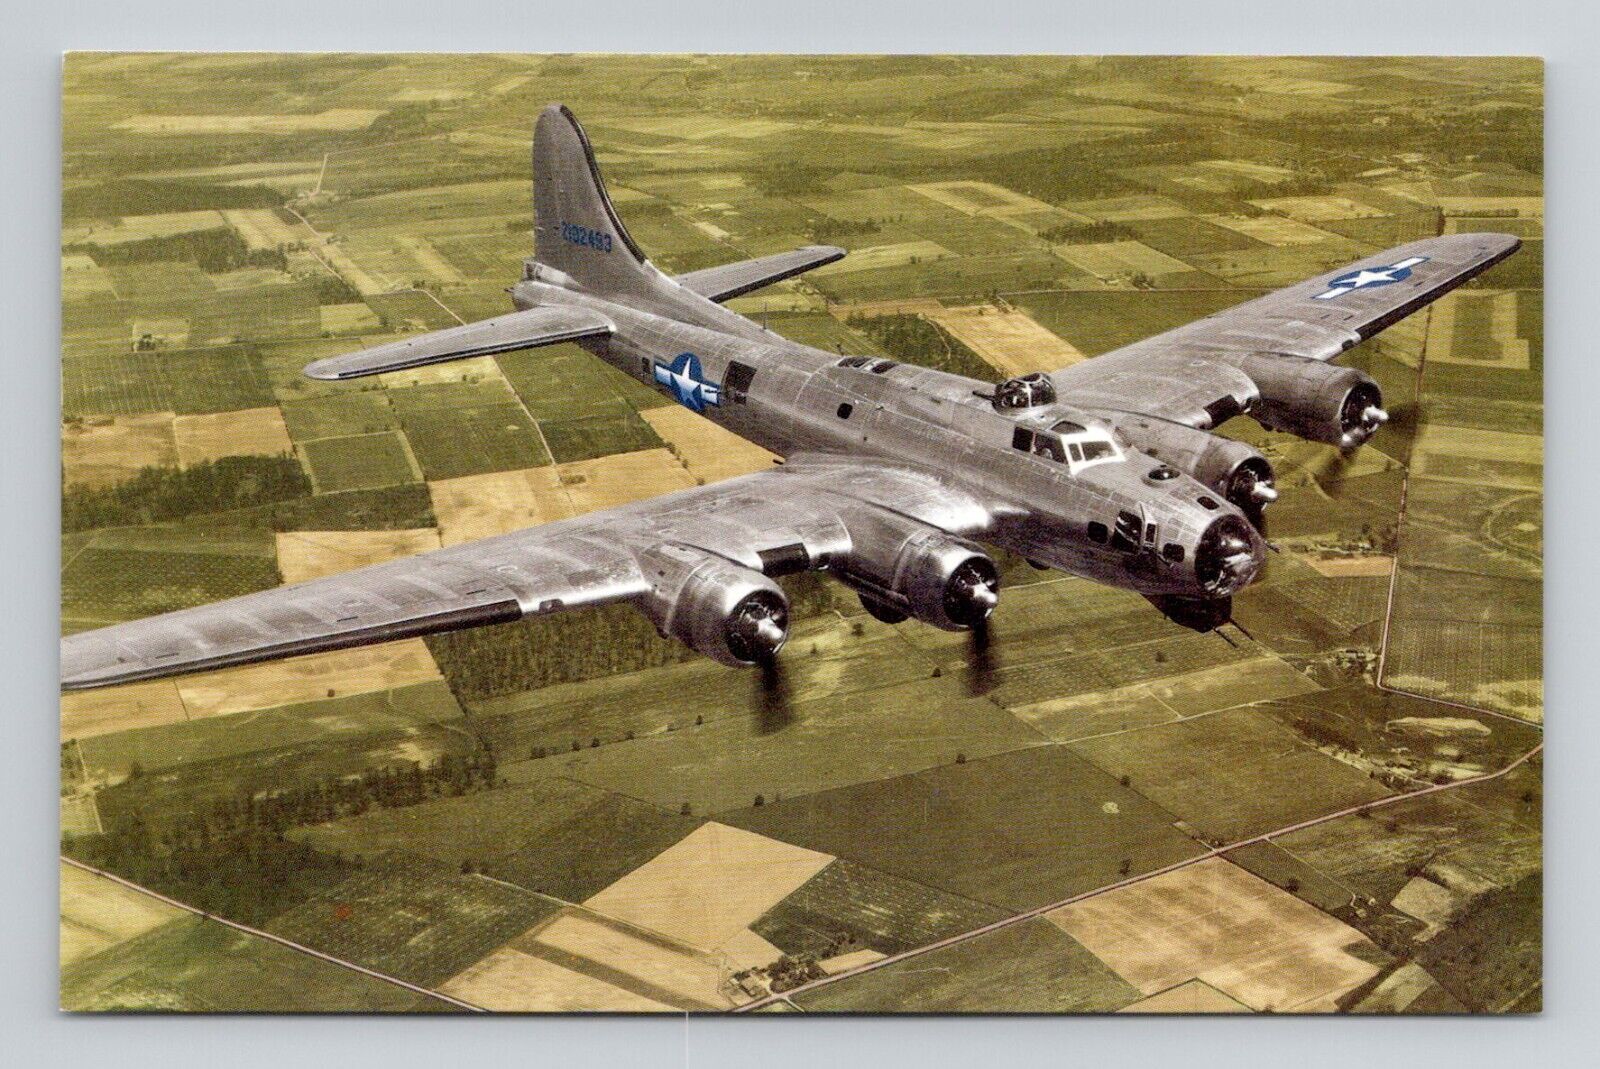 Postcard WWII Army Air Force B-17 Bomber Flying Fortress, Vintage Chrome D16